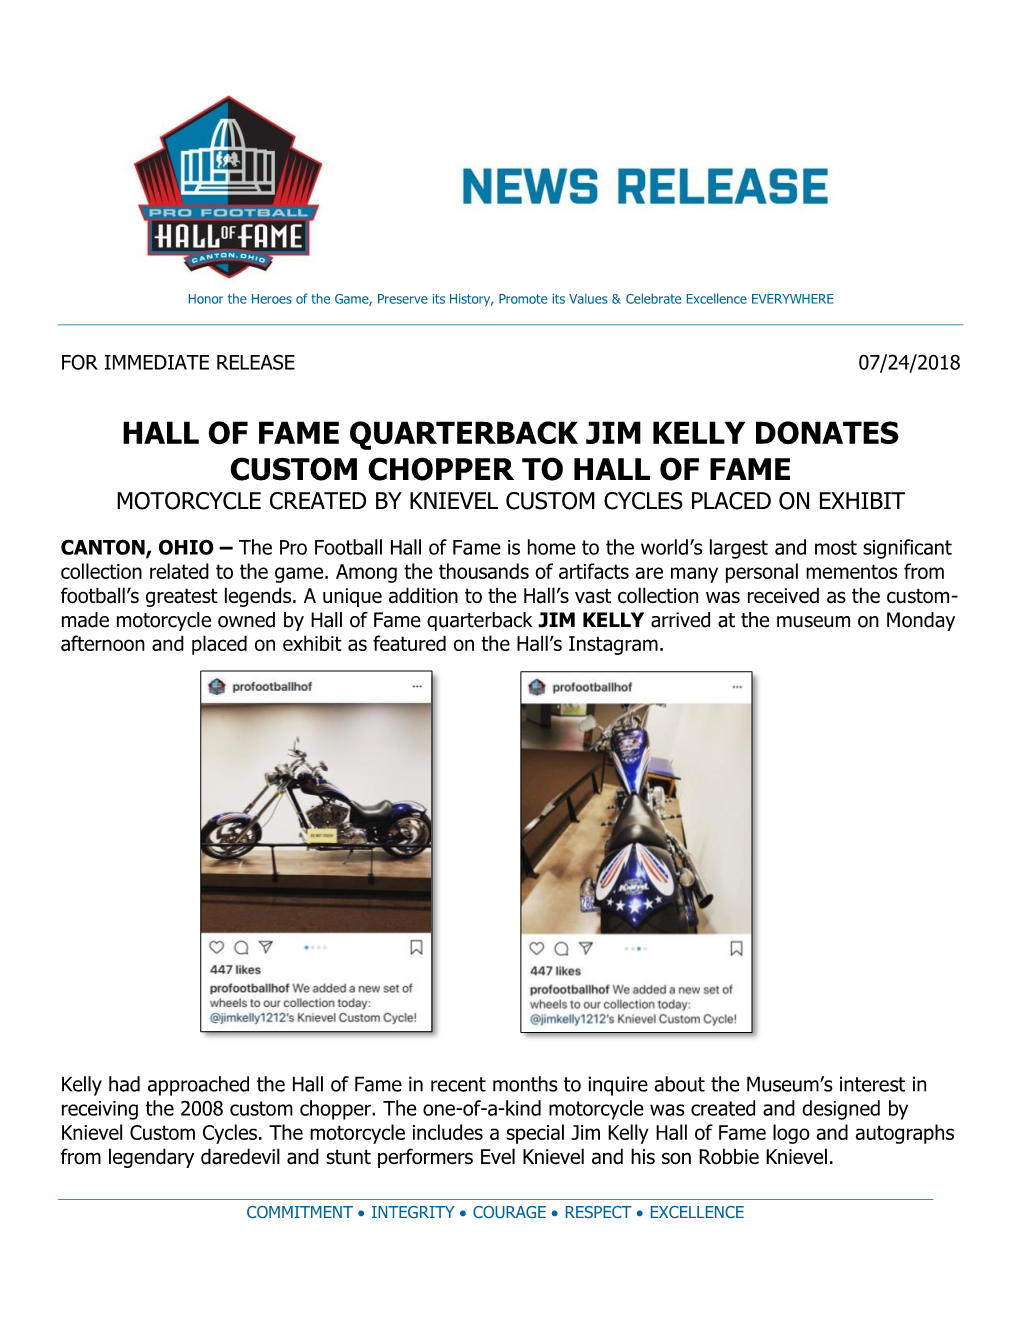 Hall of Fame Quarterback Jim Kelly Donates Custom Chopper to Hall of Fame Motorcycle Created by Knievel Custom Cycles Placed on Exhibit